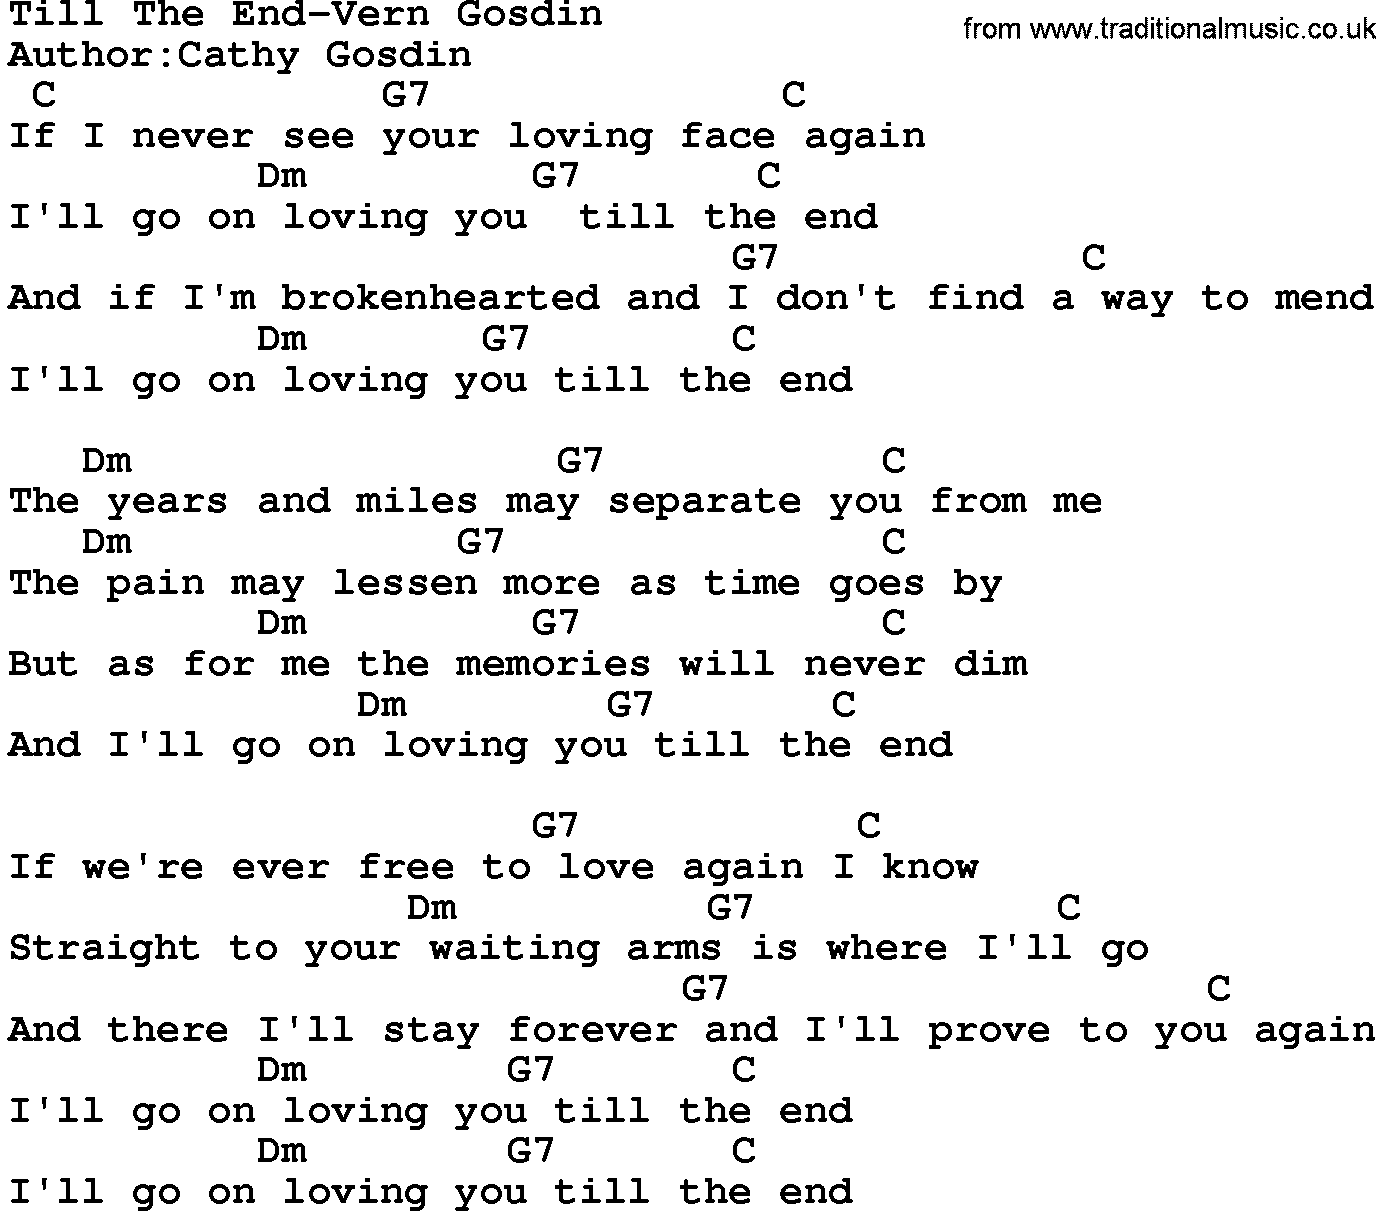 Country music song: Till The End-Vern Gosdin lyrics and chords